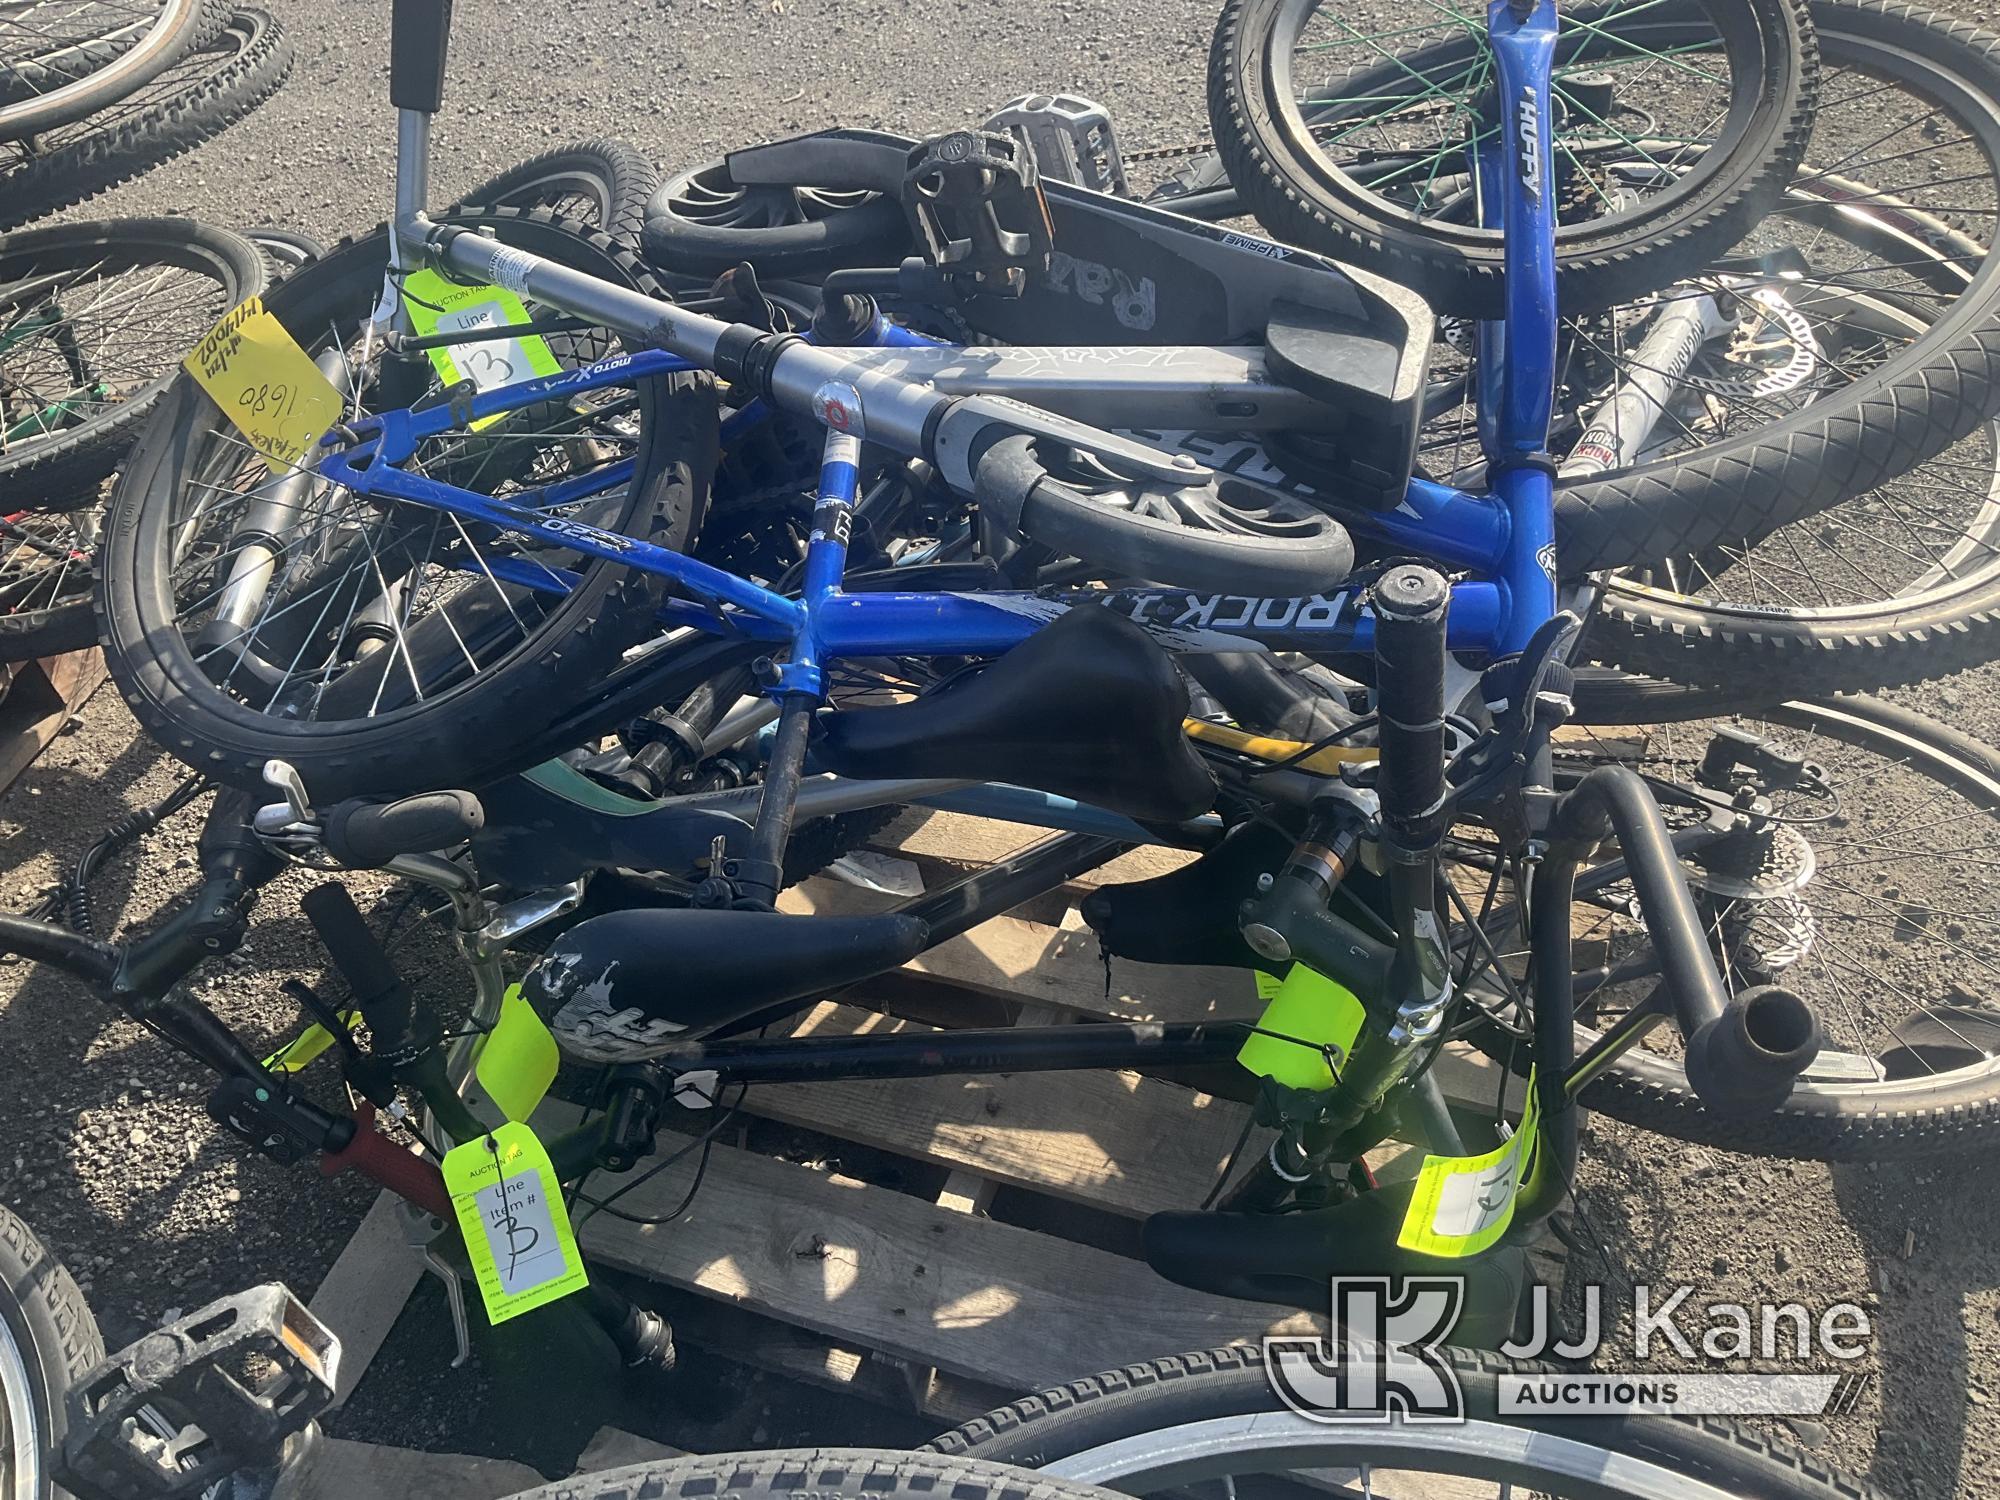 (Jurupa Valley, CA) Two pallets of bikes (Used) NOTE: This unit is being sold AS IS/WHERE IS via Tim